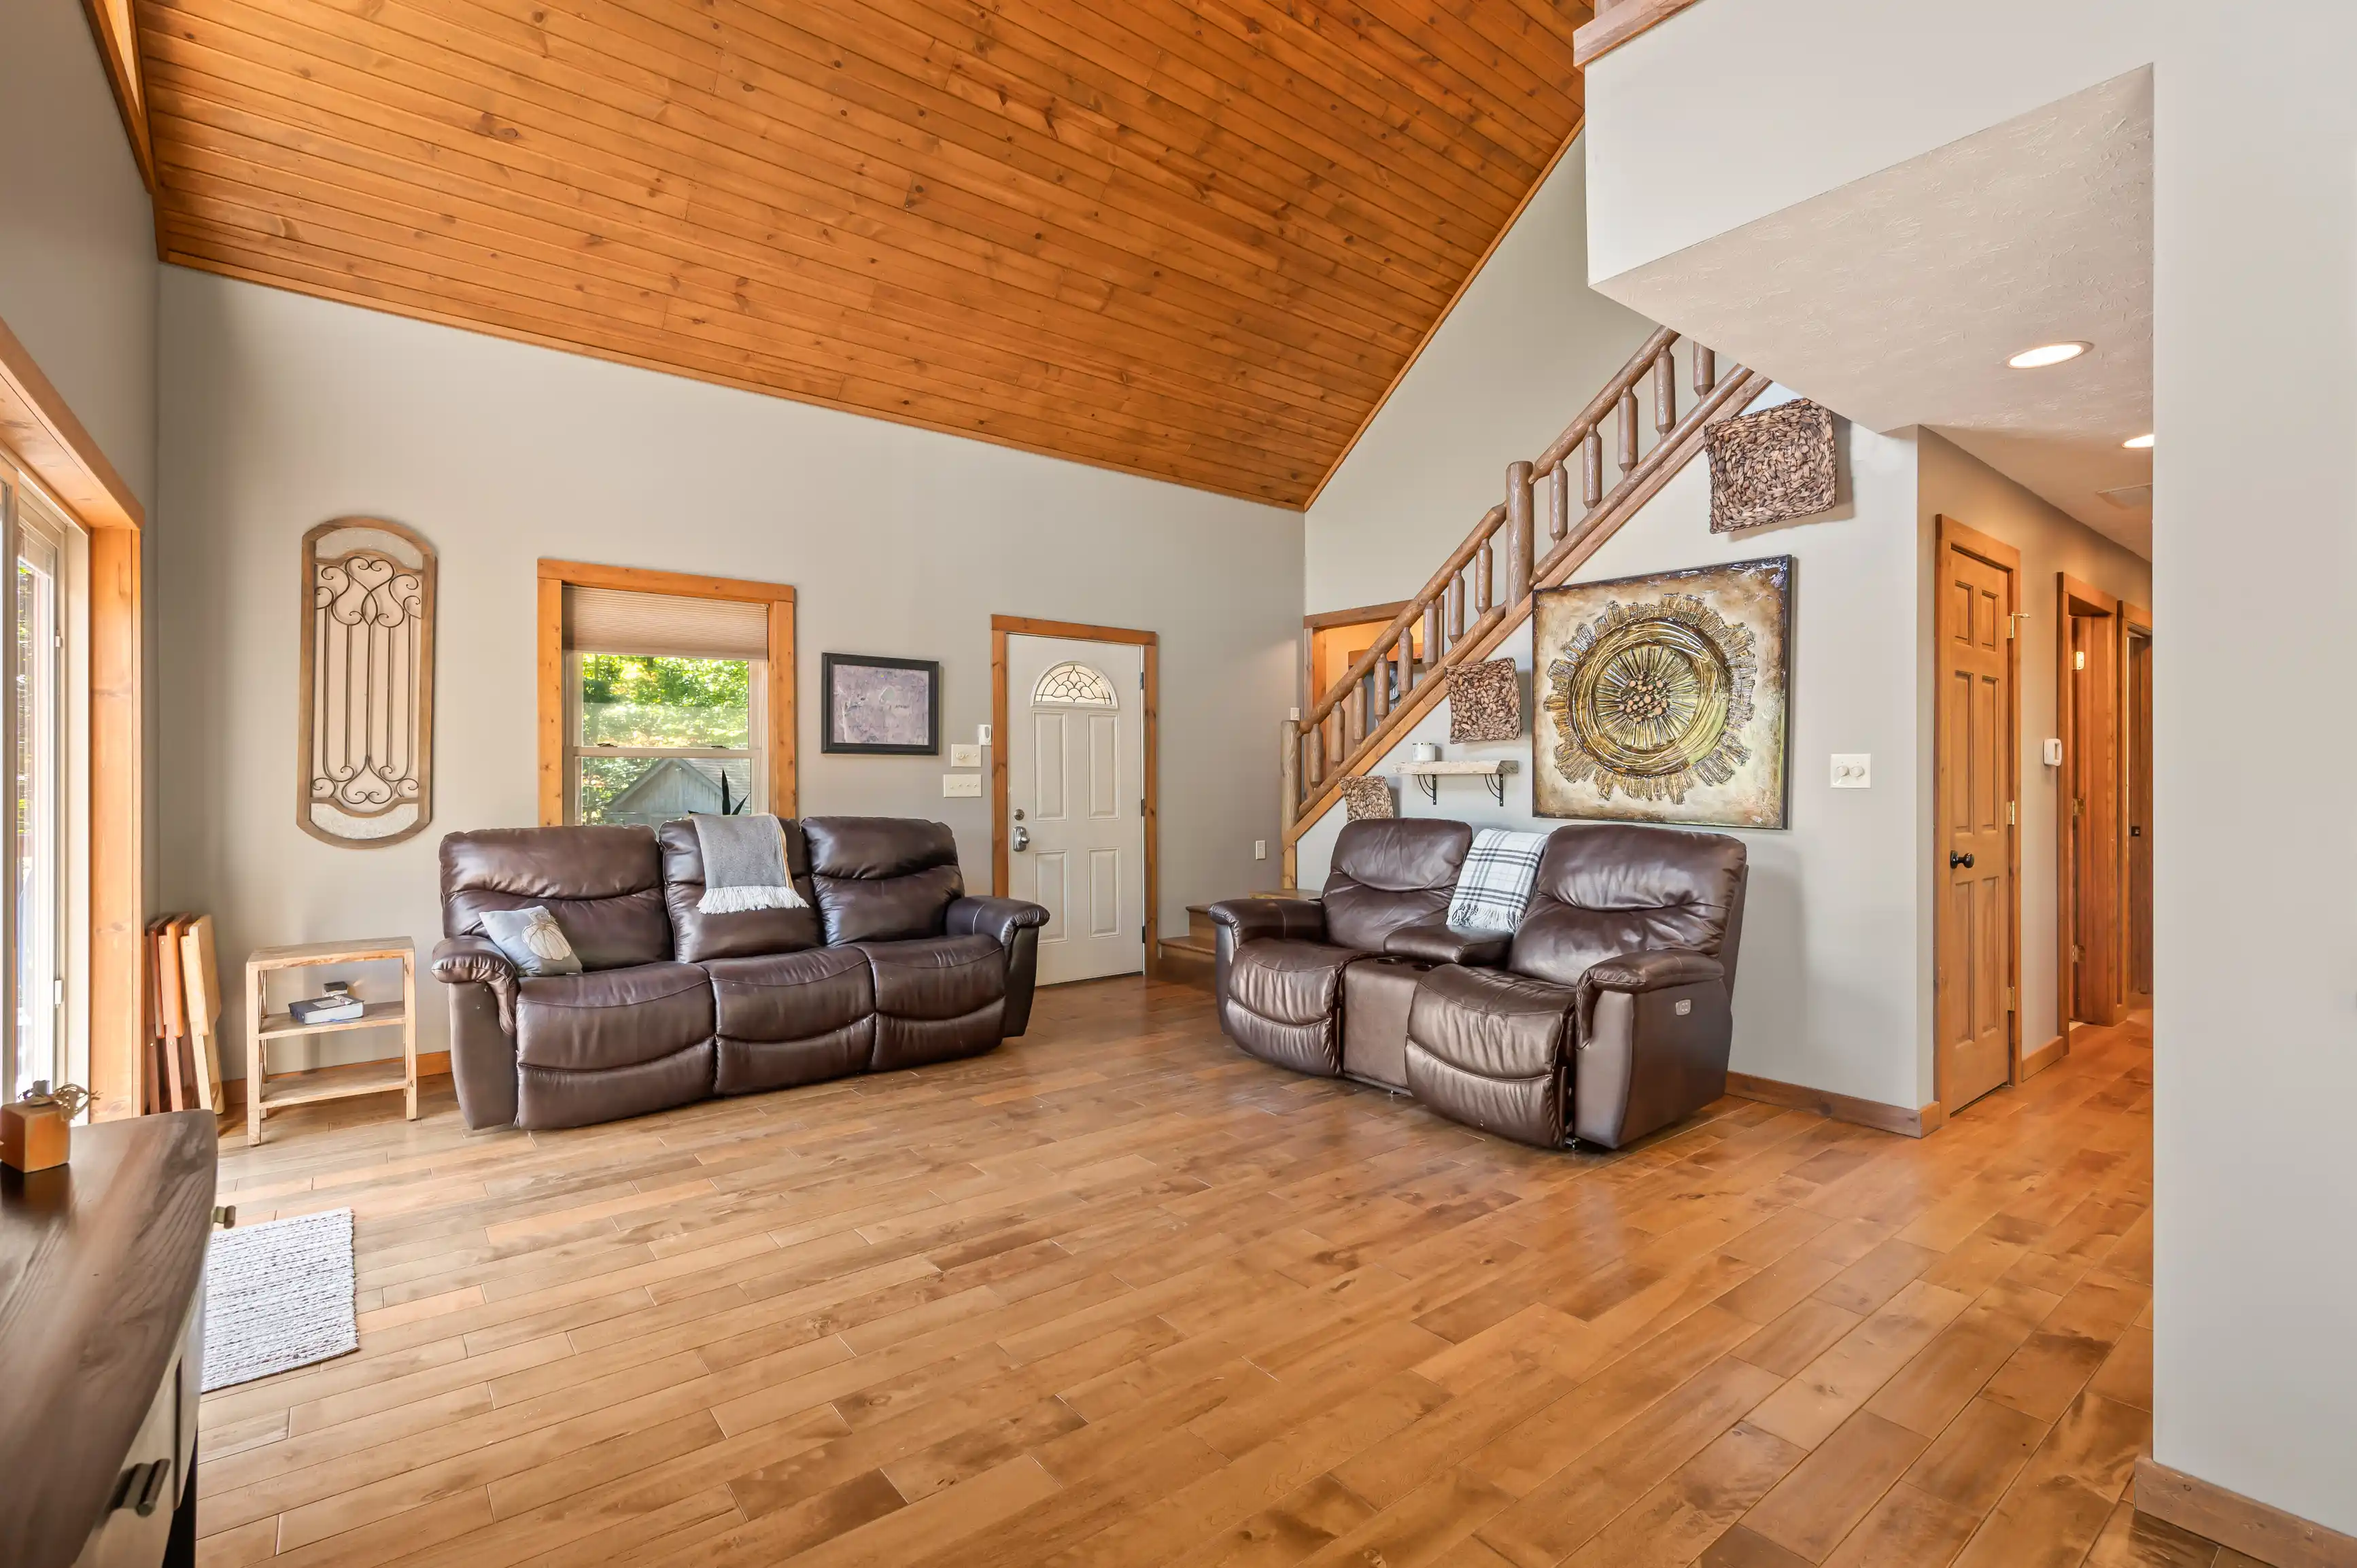 Spacious living room with vaulted wooden ceiling, leather sofas, hardwood floors, and staircase.